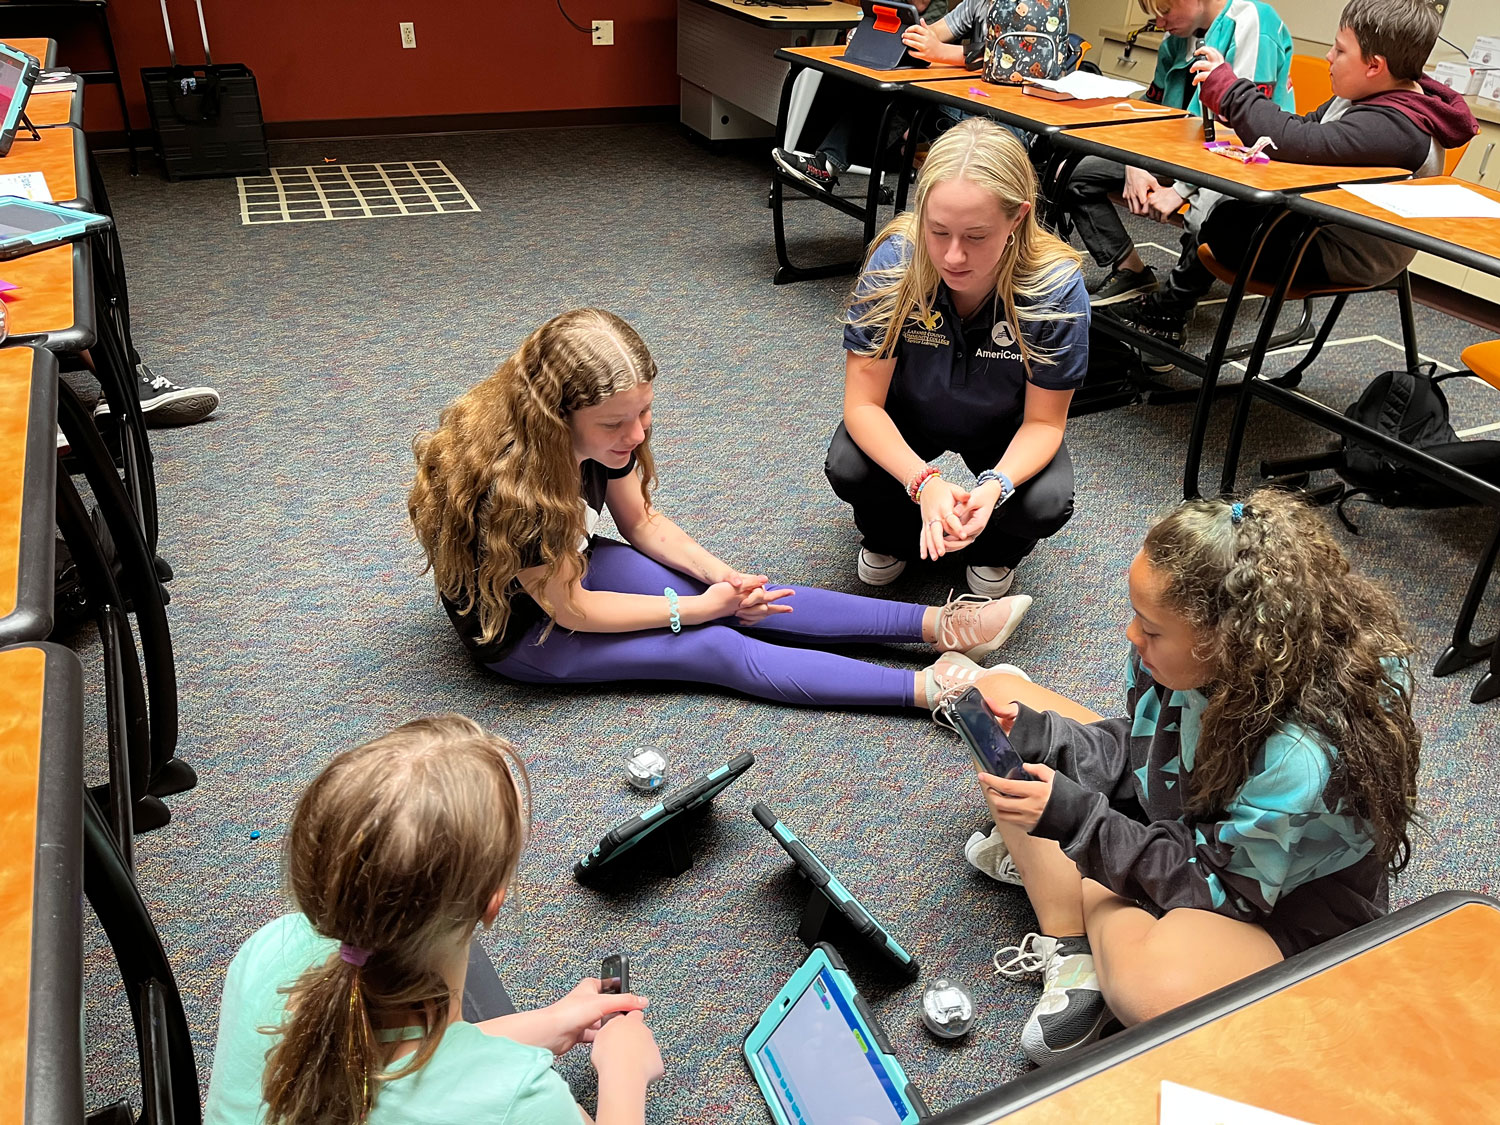 photo of an LCCC student helping younger students with iPads while sitting on the floor